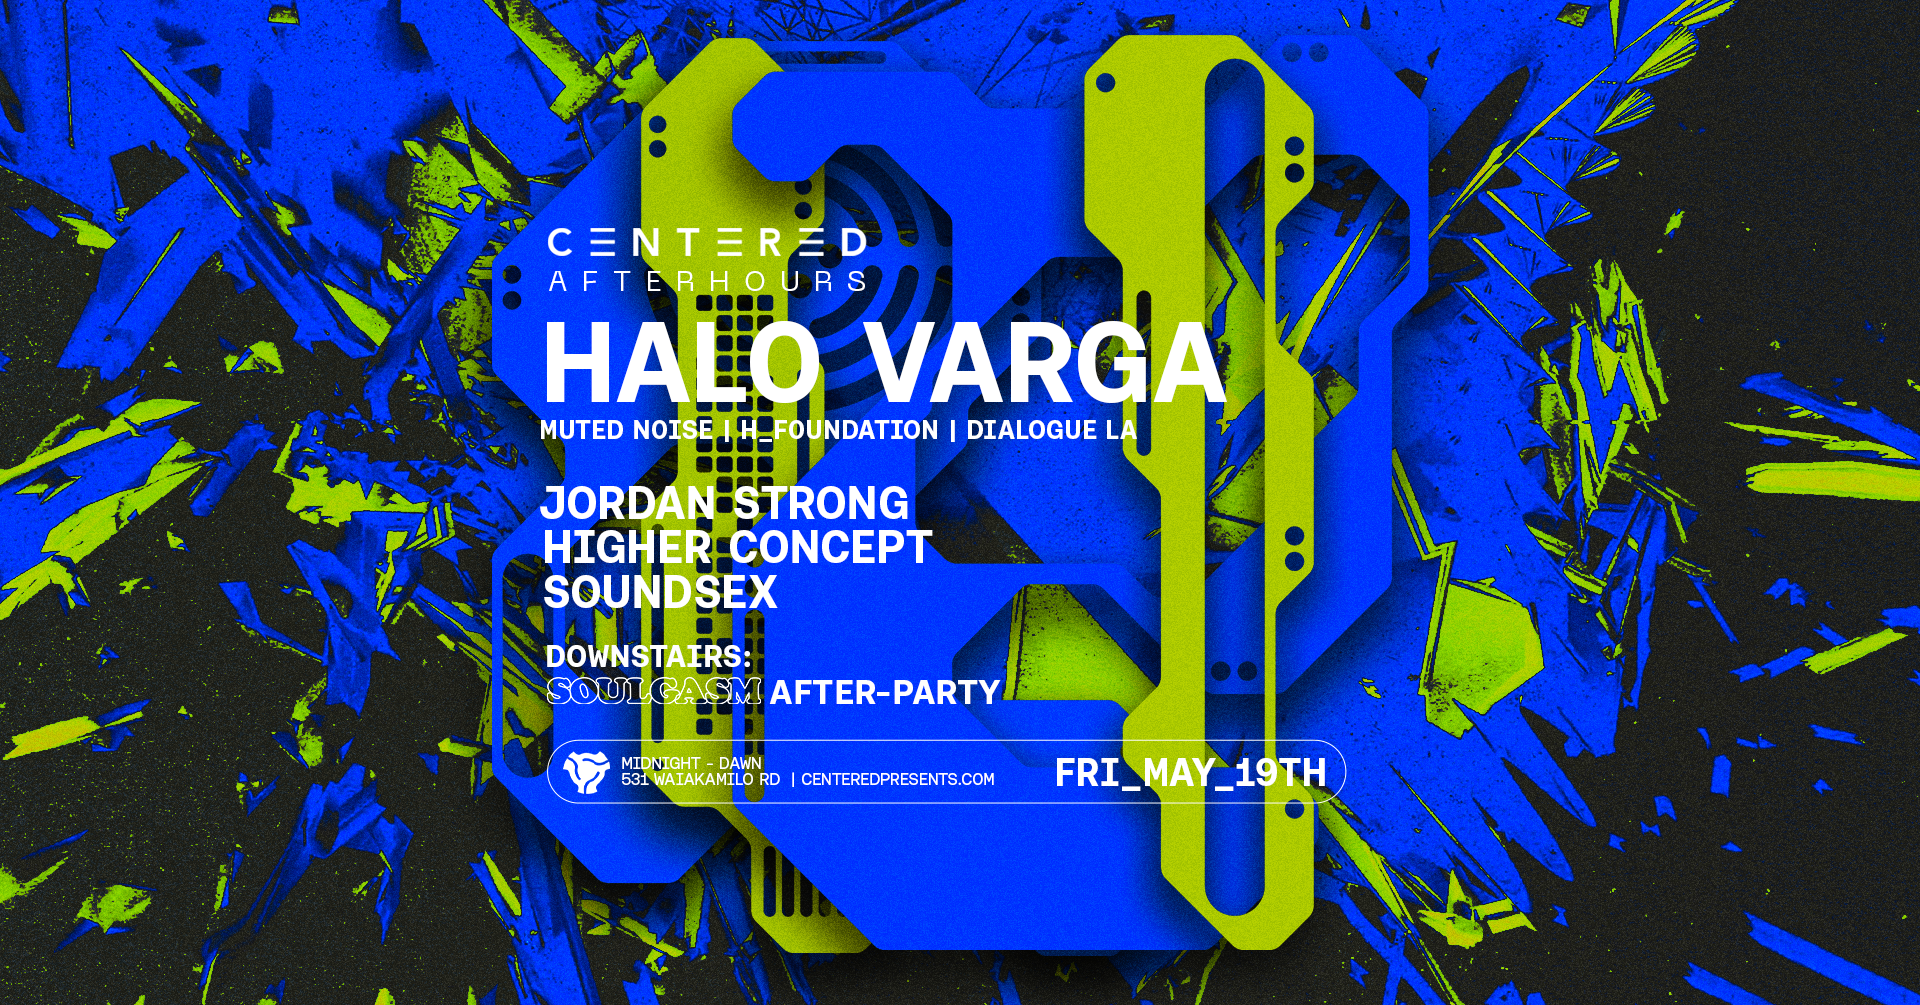 Centered Afterhours, Halo Varga (MUTED NOISE - H_FOUNDATION - DIALOGUE LA) - フライヤー表